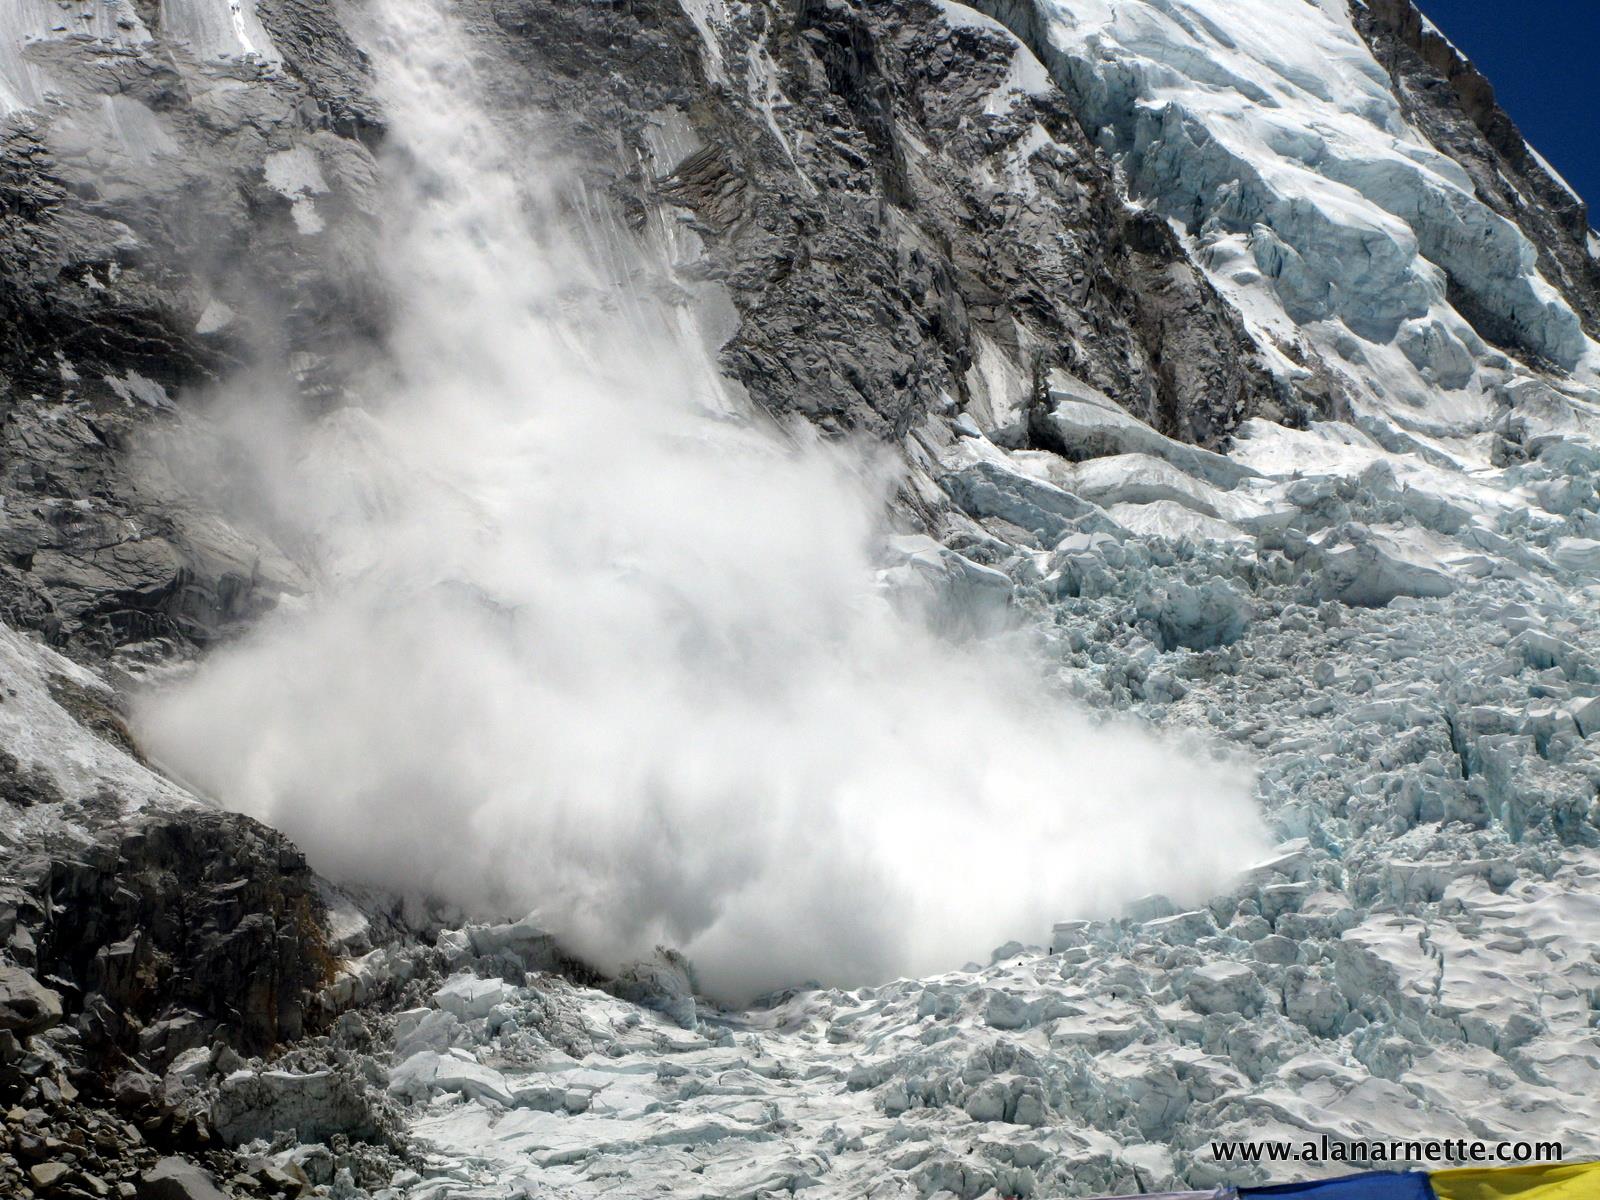 An avalanche off the West Shoulder of Everest onto the Khumbu Icefall in 2008.